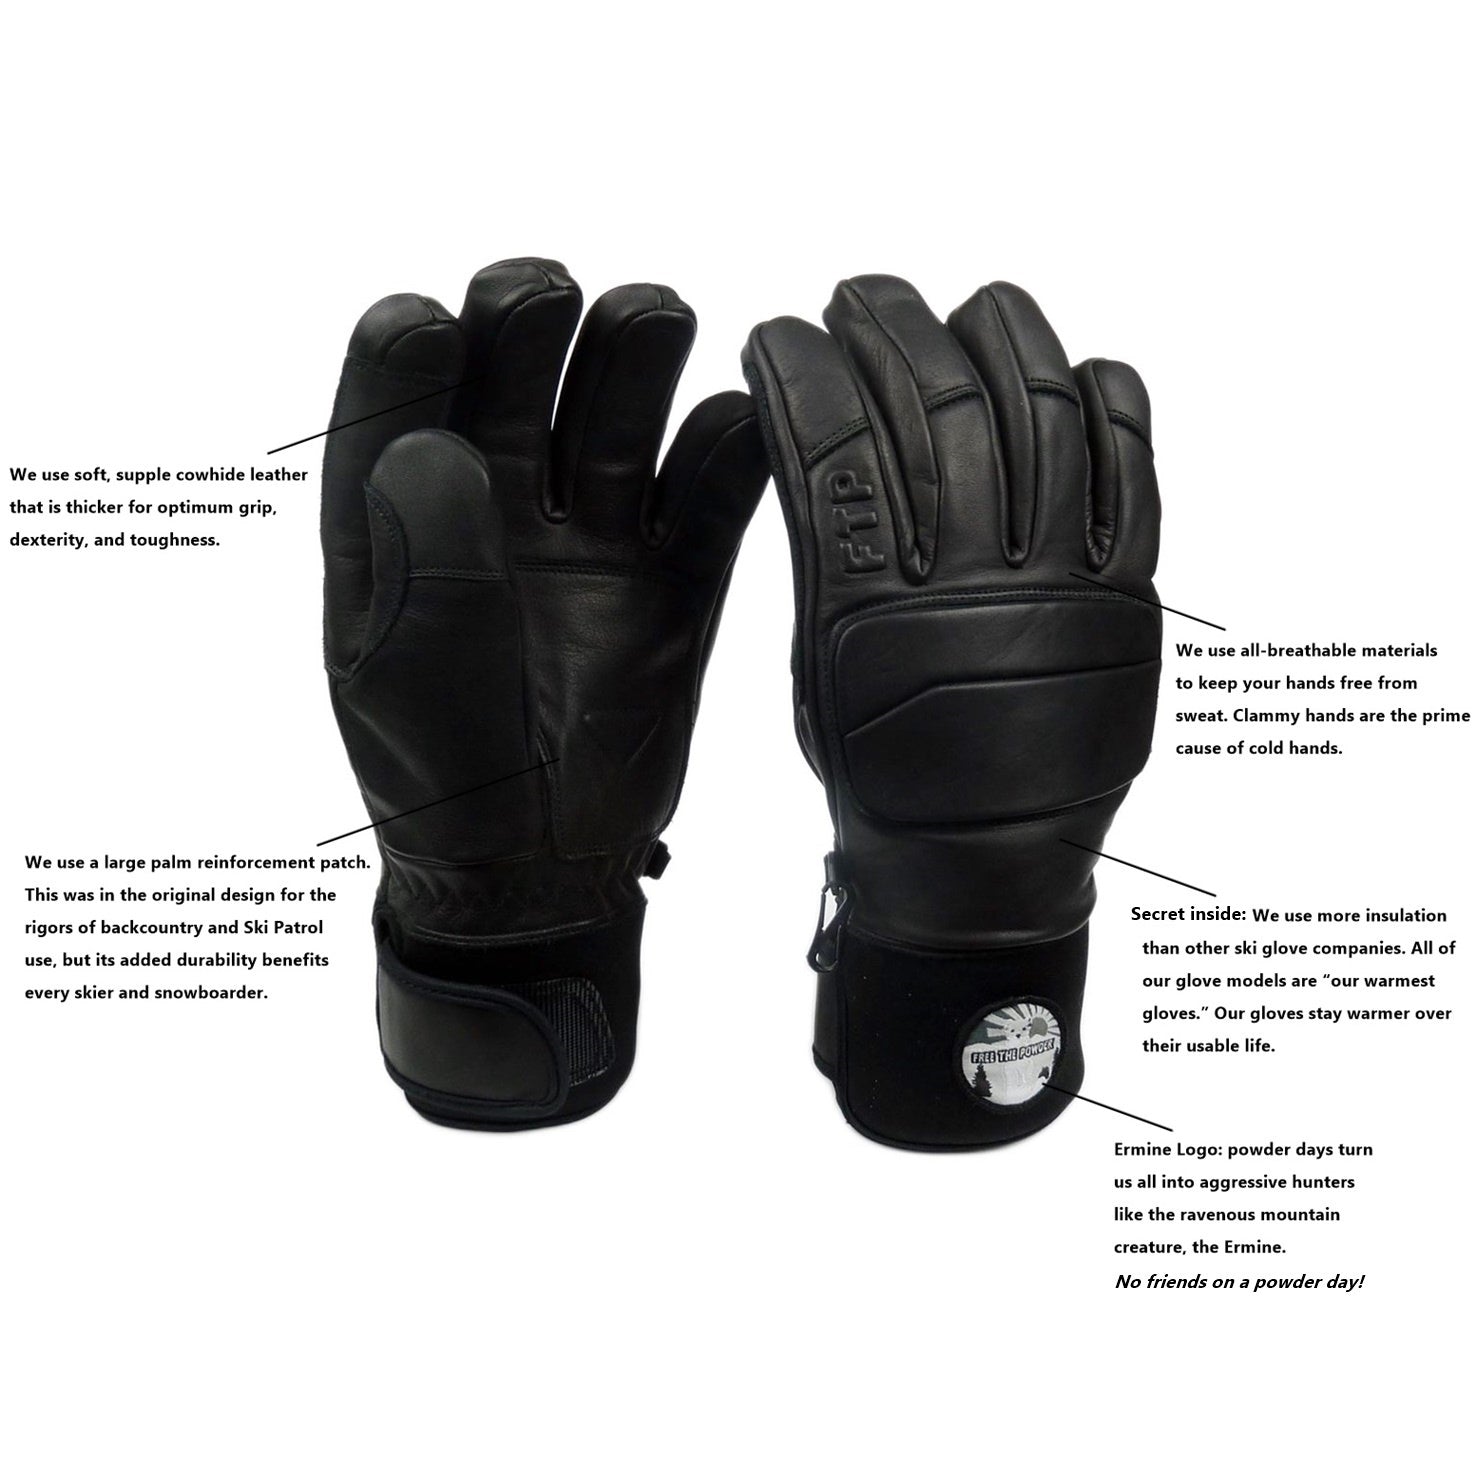 details specs Freeride Sable Glove by Free the Powder